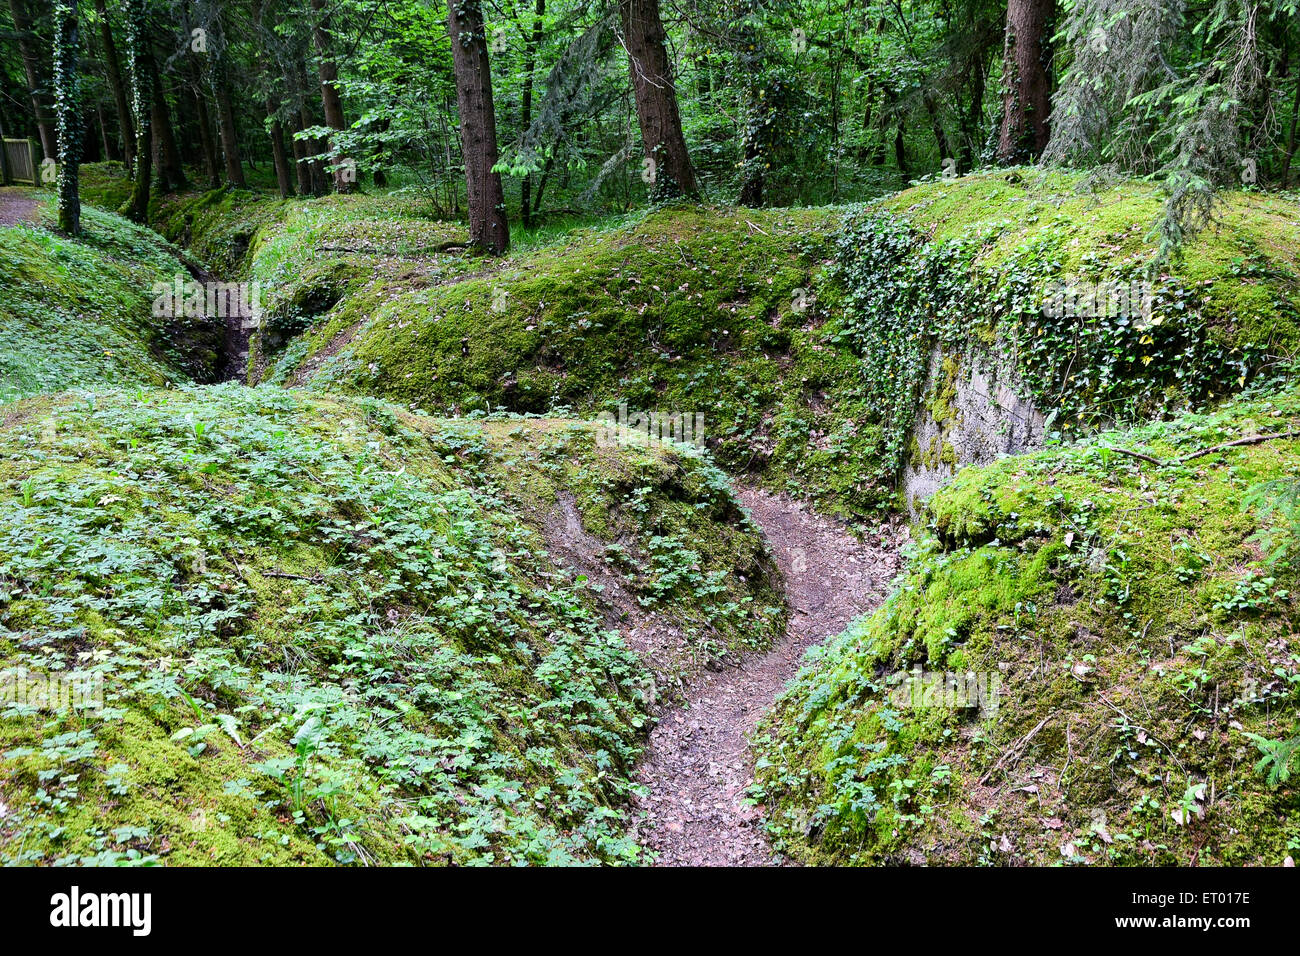 German First World War trench called 'Trench of Thirst' by the French, St Mihiel salient, Lorraine, France Stock Photo